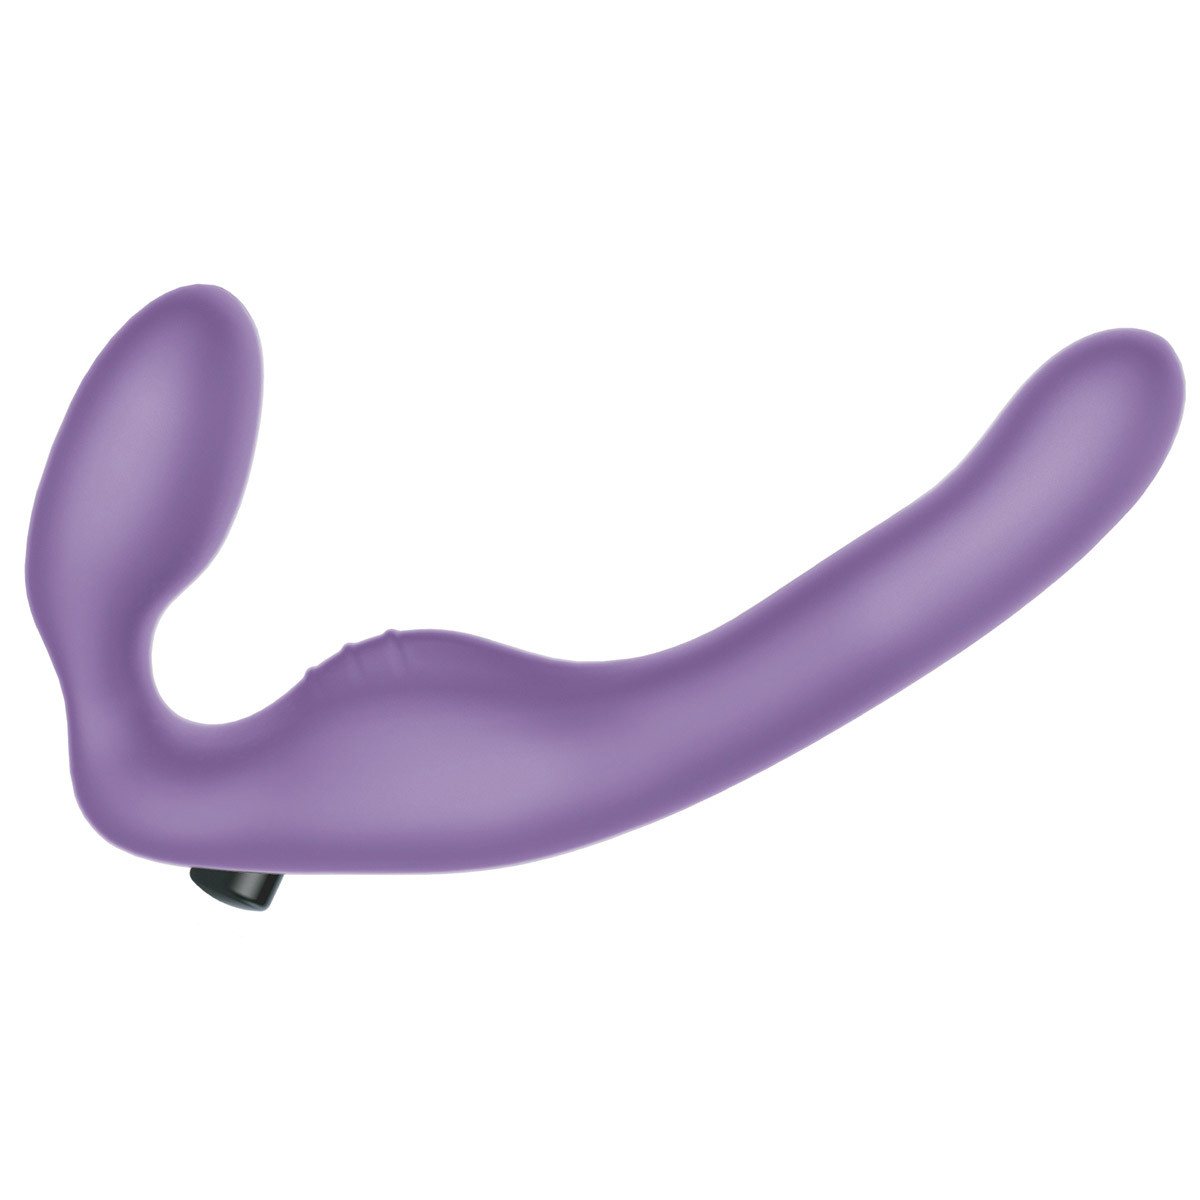 Vibrating Union Strapless Double Dildo by Wet for Her - Hamilton Park Electronics